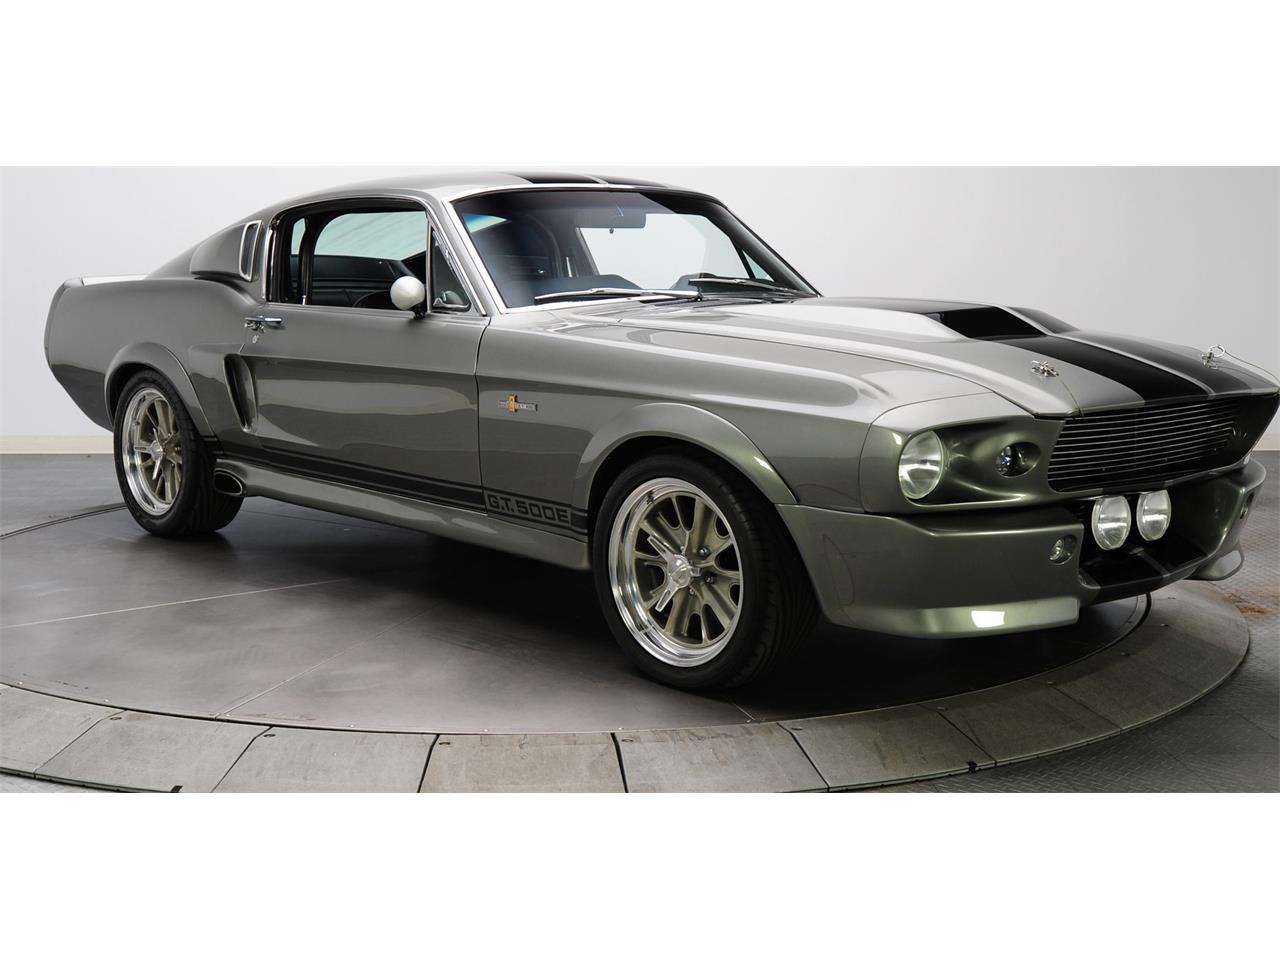 Mustang Shelby Gt500 1967 For Sale